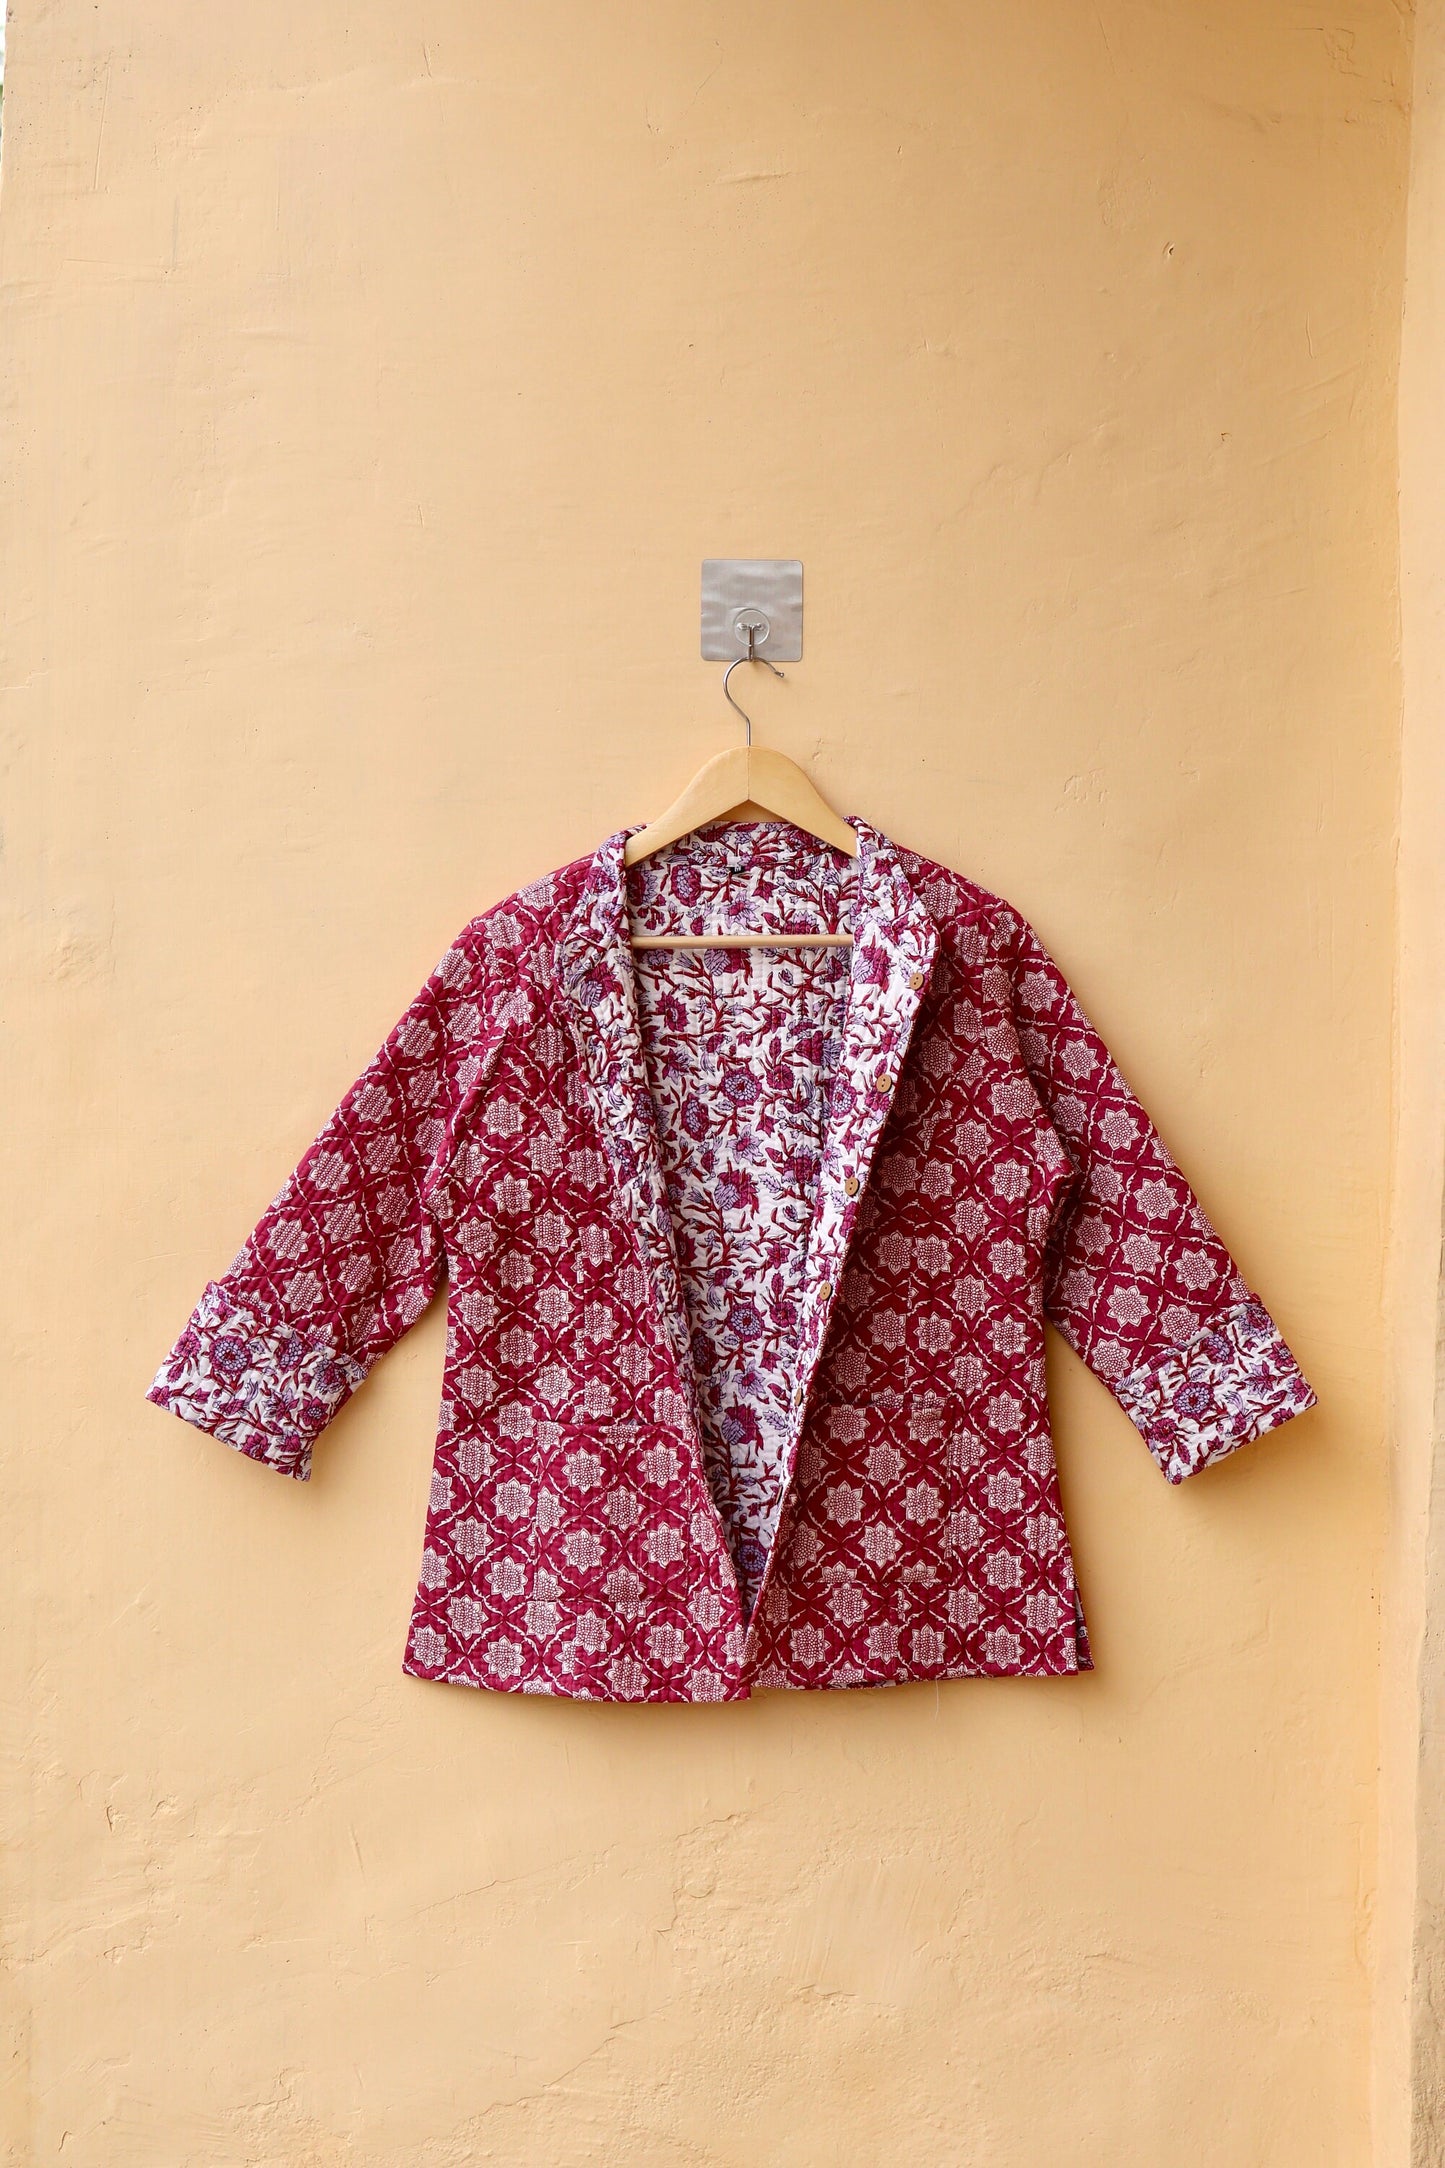 Kantha Quilted Cotton Jacket Stylish Red Floral Women's Coat, Indian Handmade Reversible Waistcoat for Her